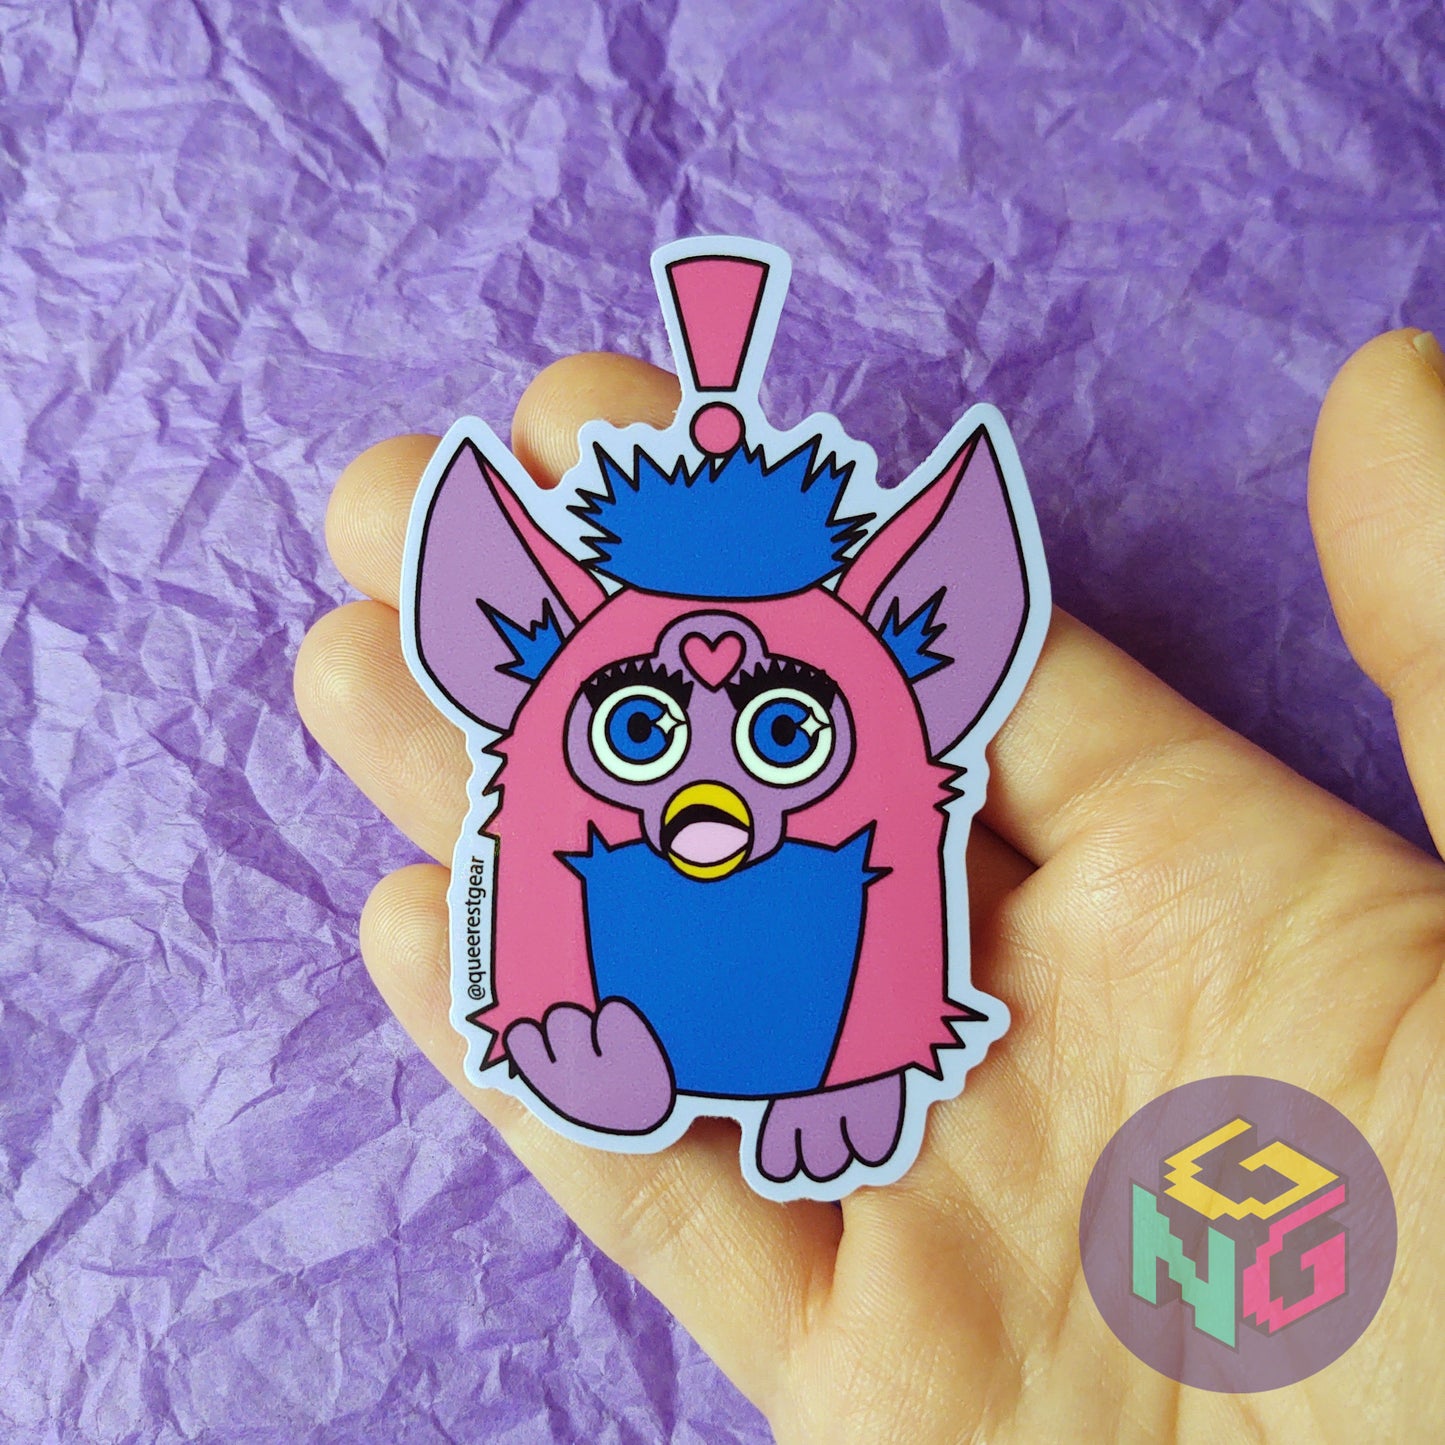 bisexual surprised furby sticker held in a hand in front of a purple background